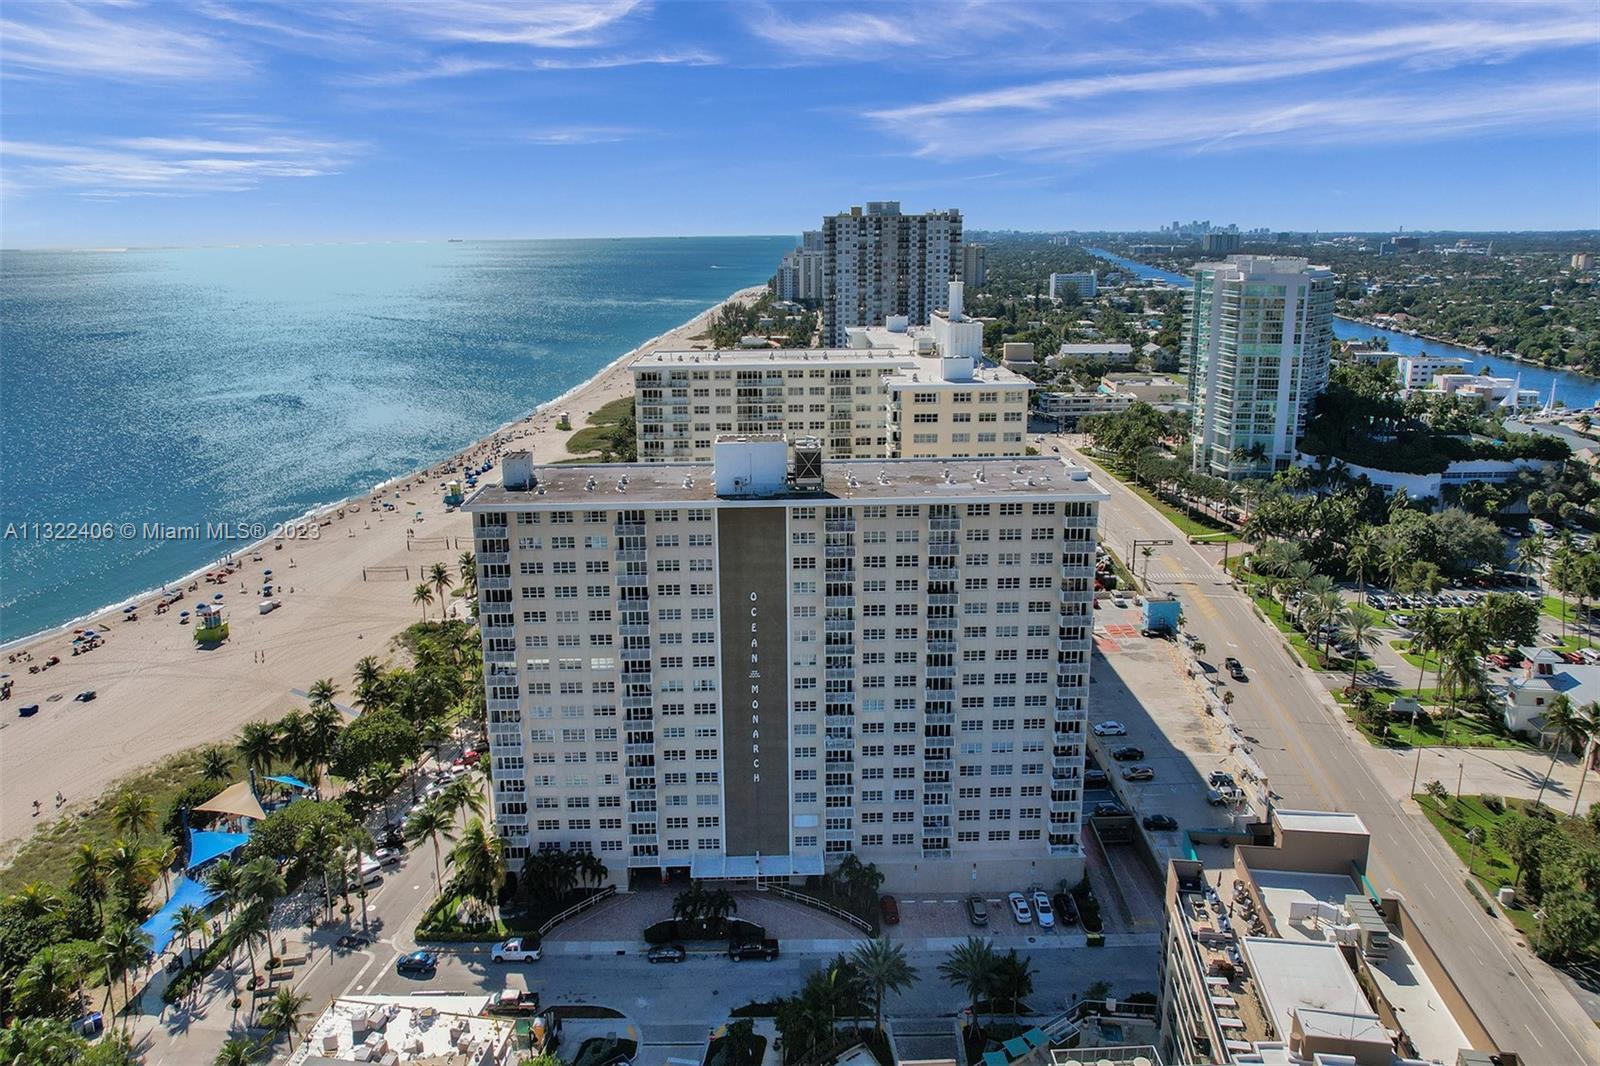 VACATION LIFESTYLE ALL YEAR LONG! LIVE IN THE HEART OF THE NEWLY REDEVELOPED POMPANO BEACH FISHING H